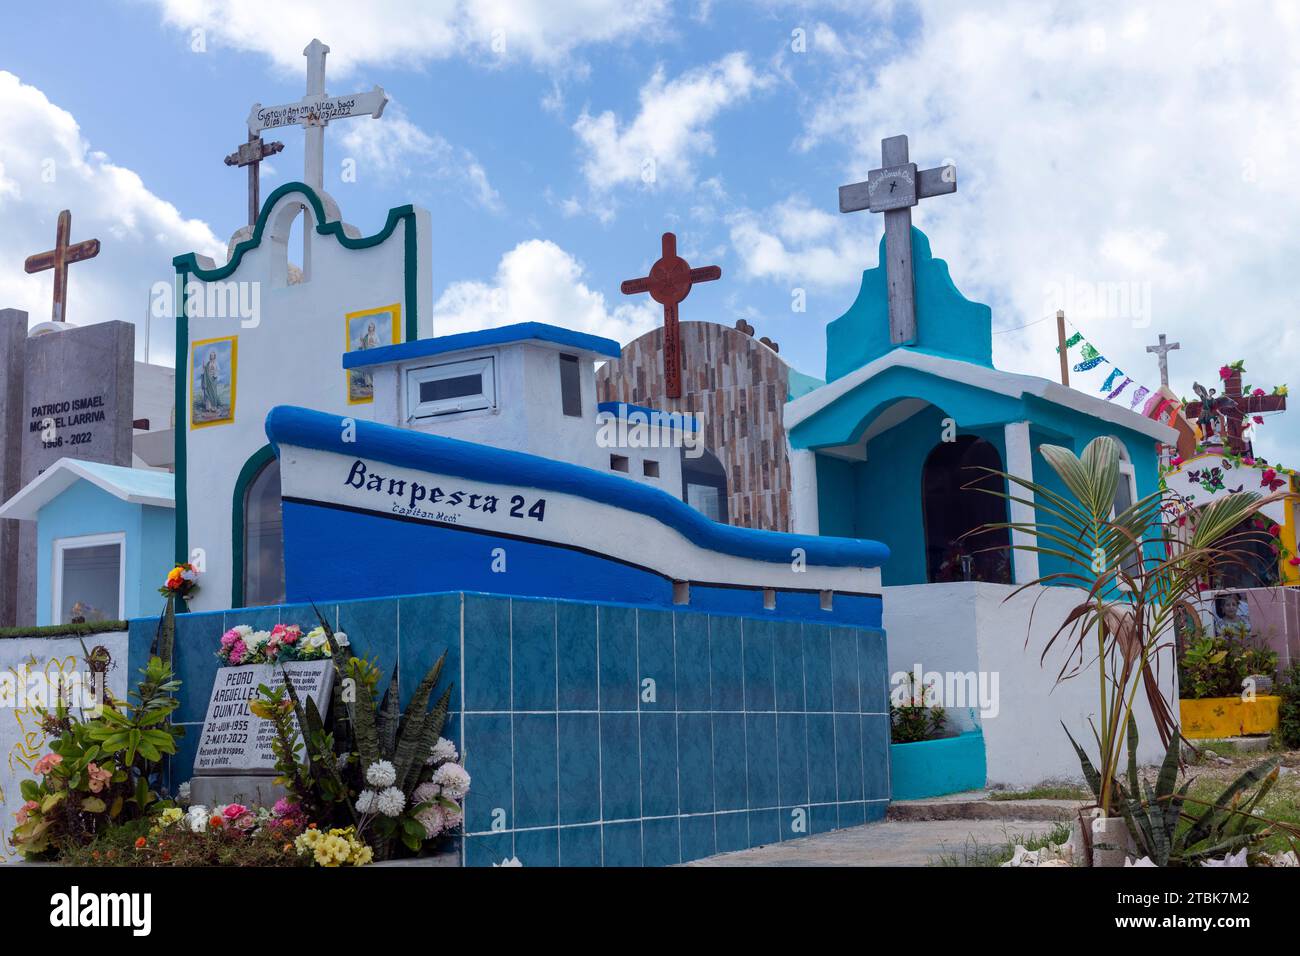 Mexico, Isla Mujeres, the islands main cemetery featuring various  colourful styles of grave markers Stock Photo